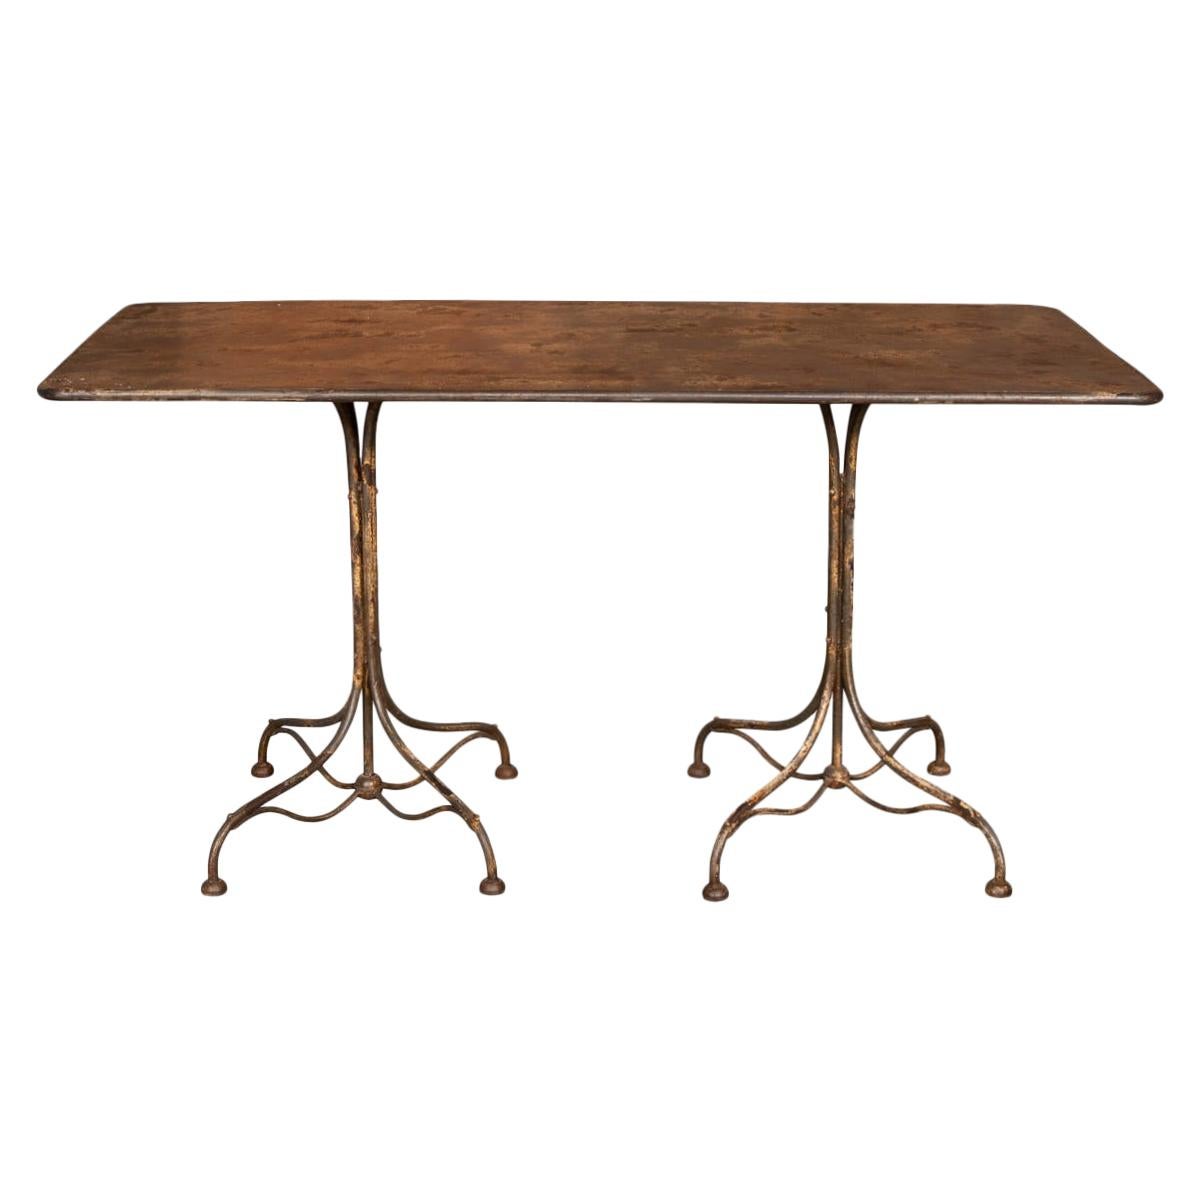 20th Century French Country House Dining Metal Table, circa 1920